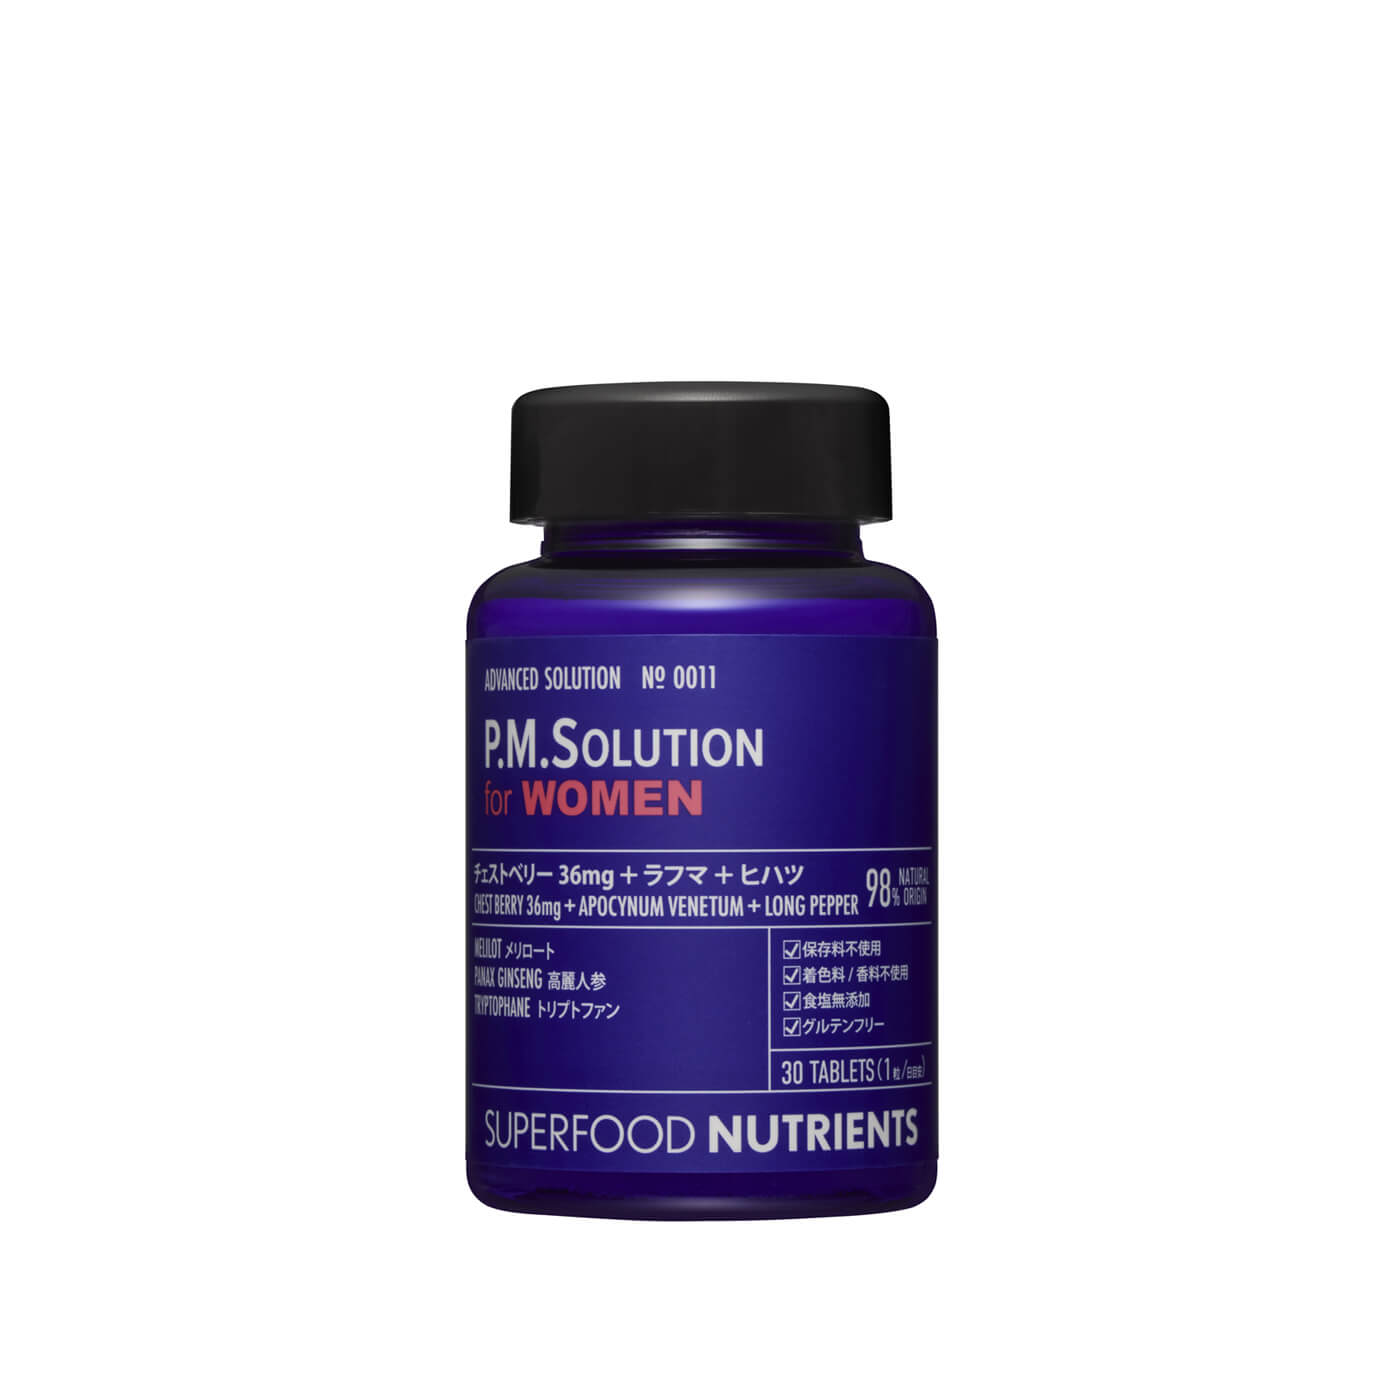 SUPERFOOD NUTRIENTS No.011 / P.M.Solution
